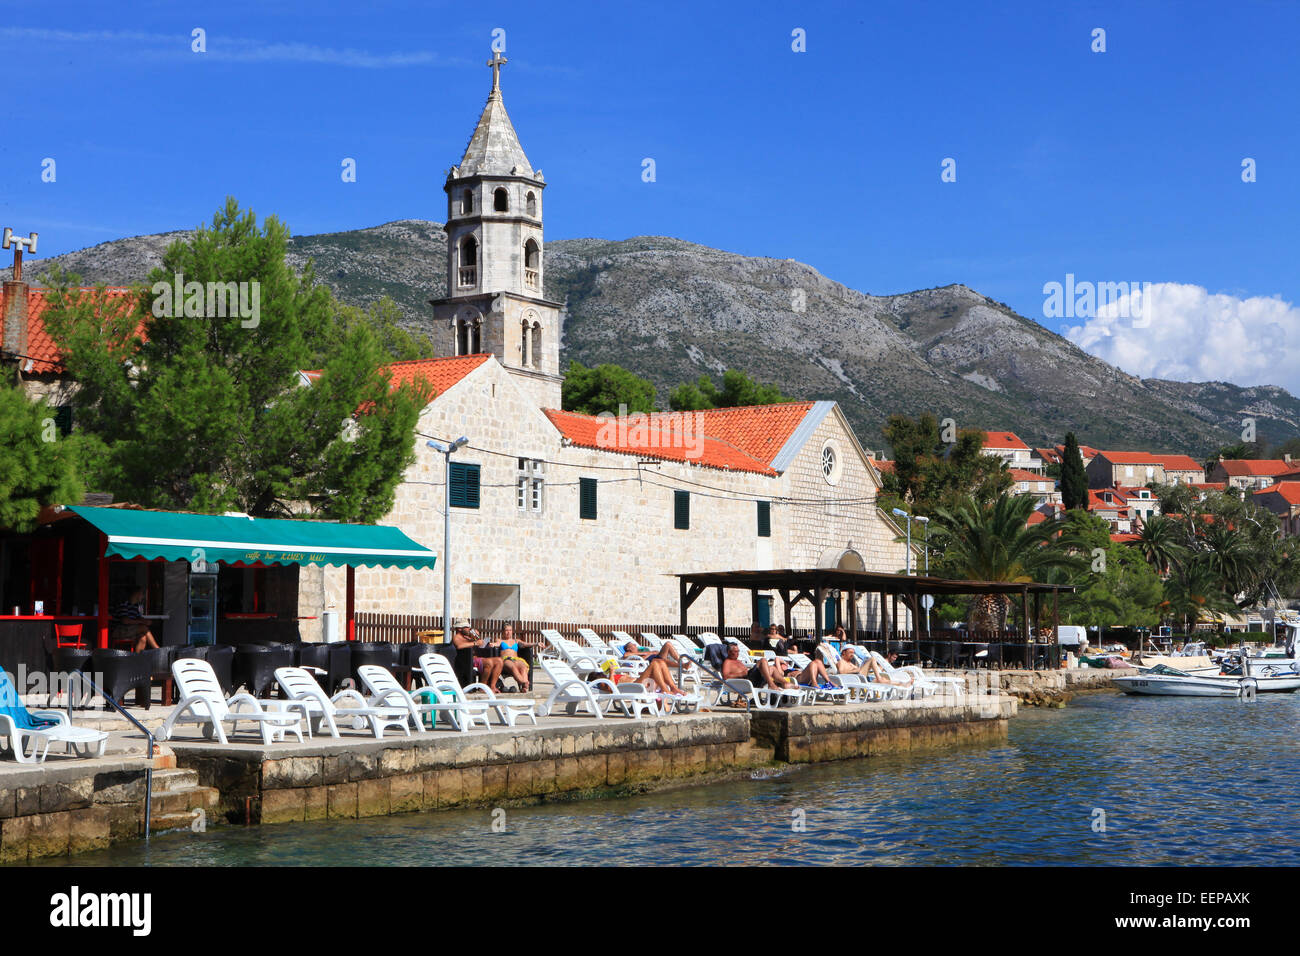 Cavtat, Harbour front, Croatia with boats in harbour and Yachts on the Adreatic Sea; Central Europe and the Mediterranean. Stock Photo